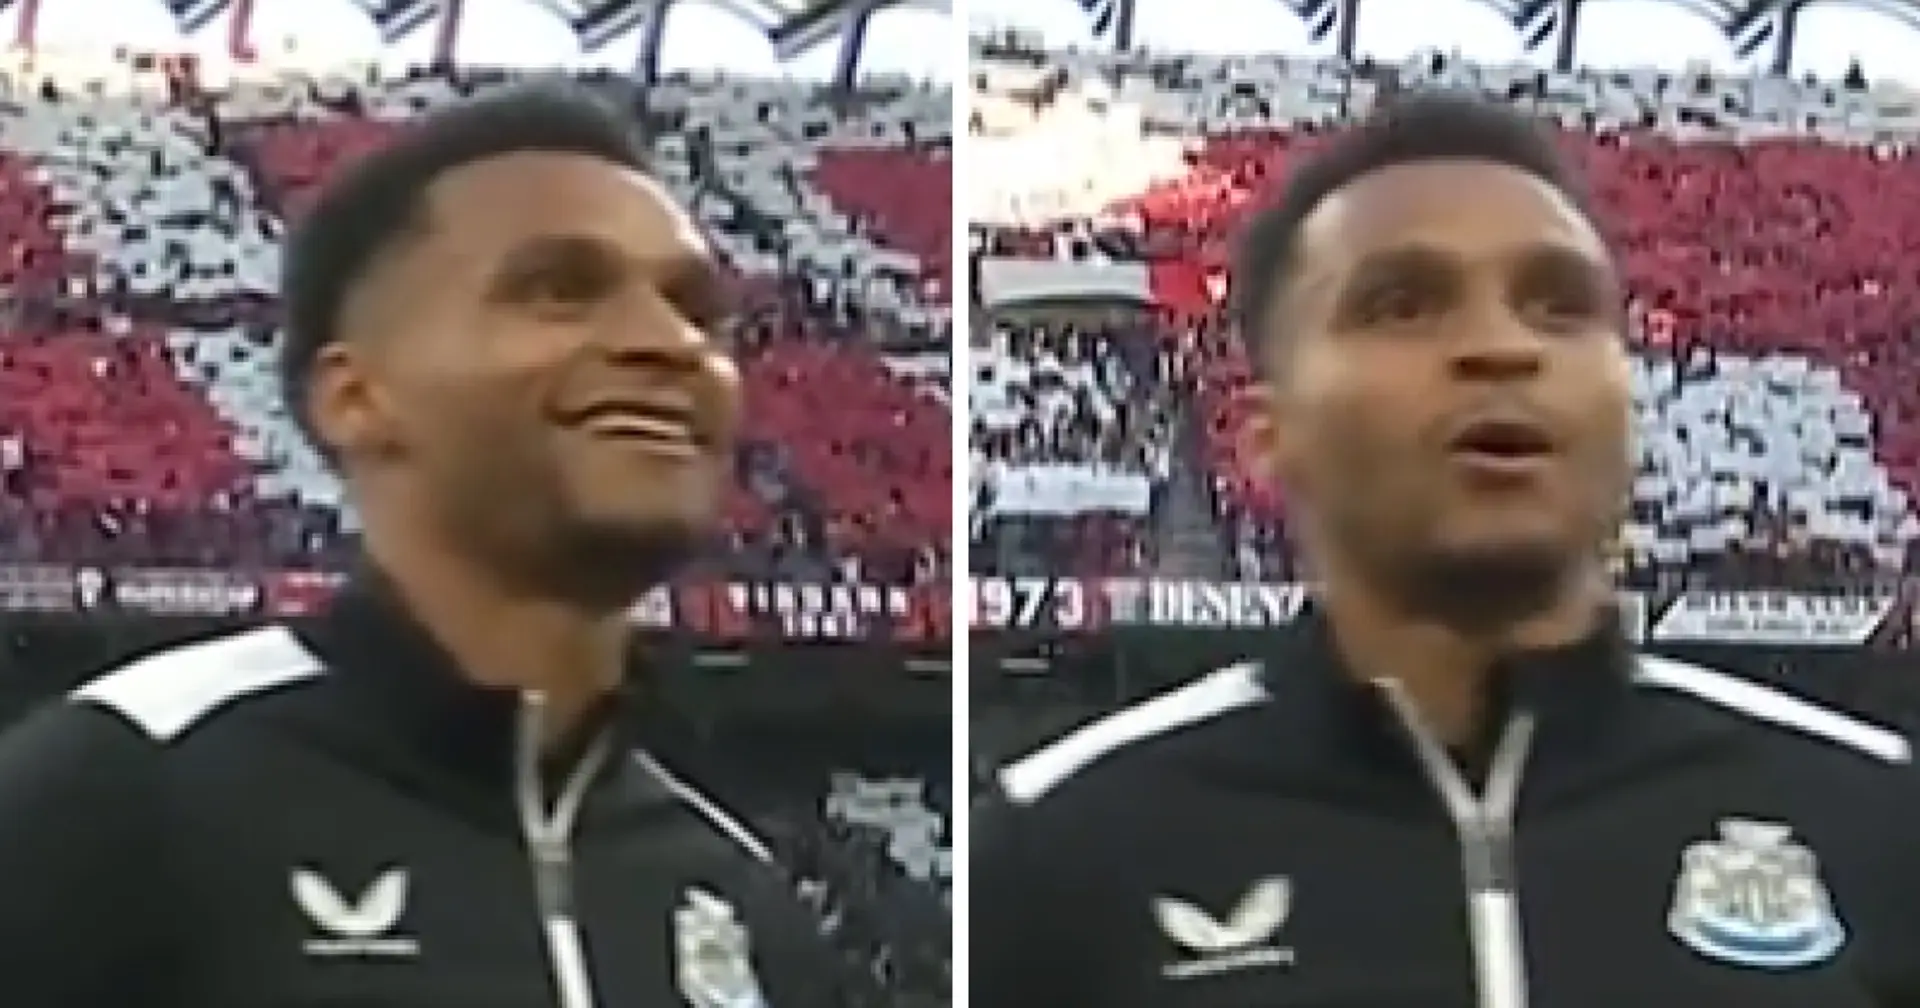 'That 30 seconds will now live with me': Jacob Murphy on his reaction to Champions League theme